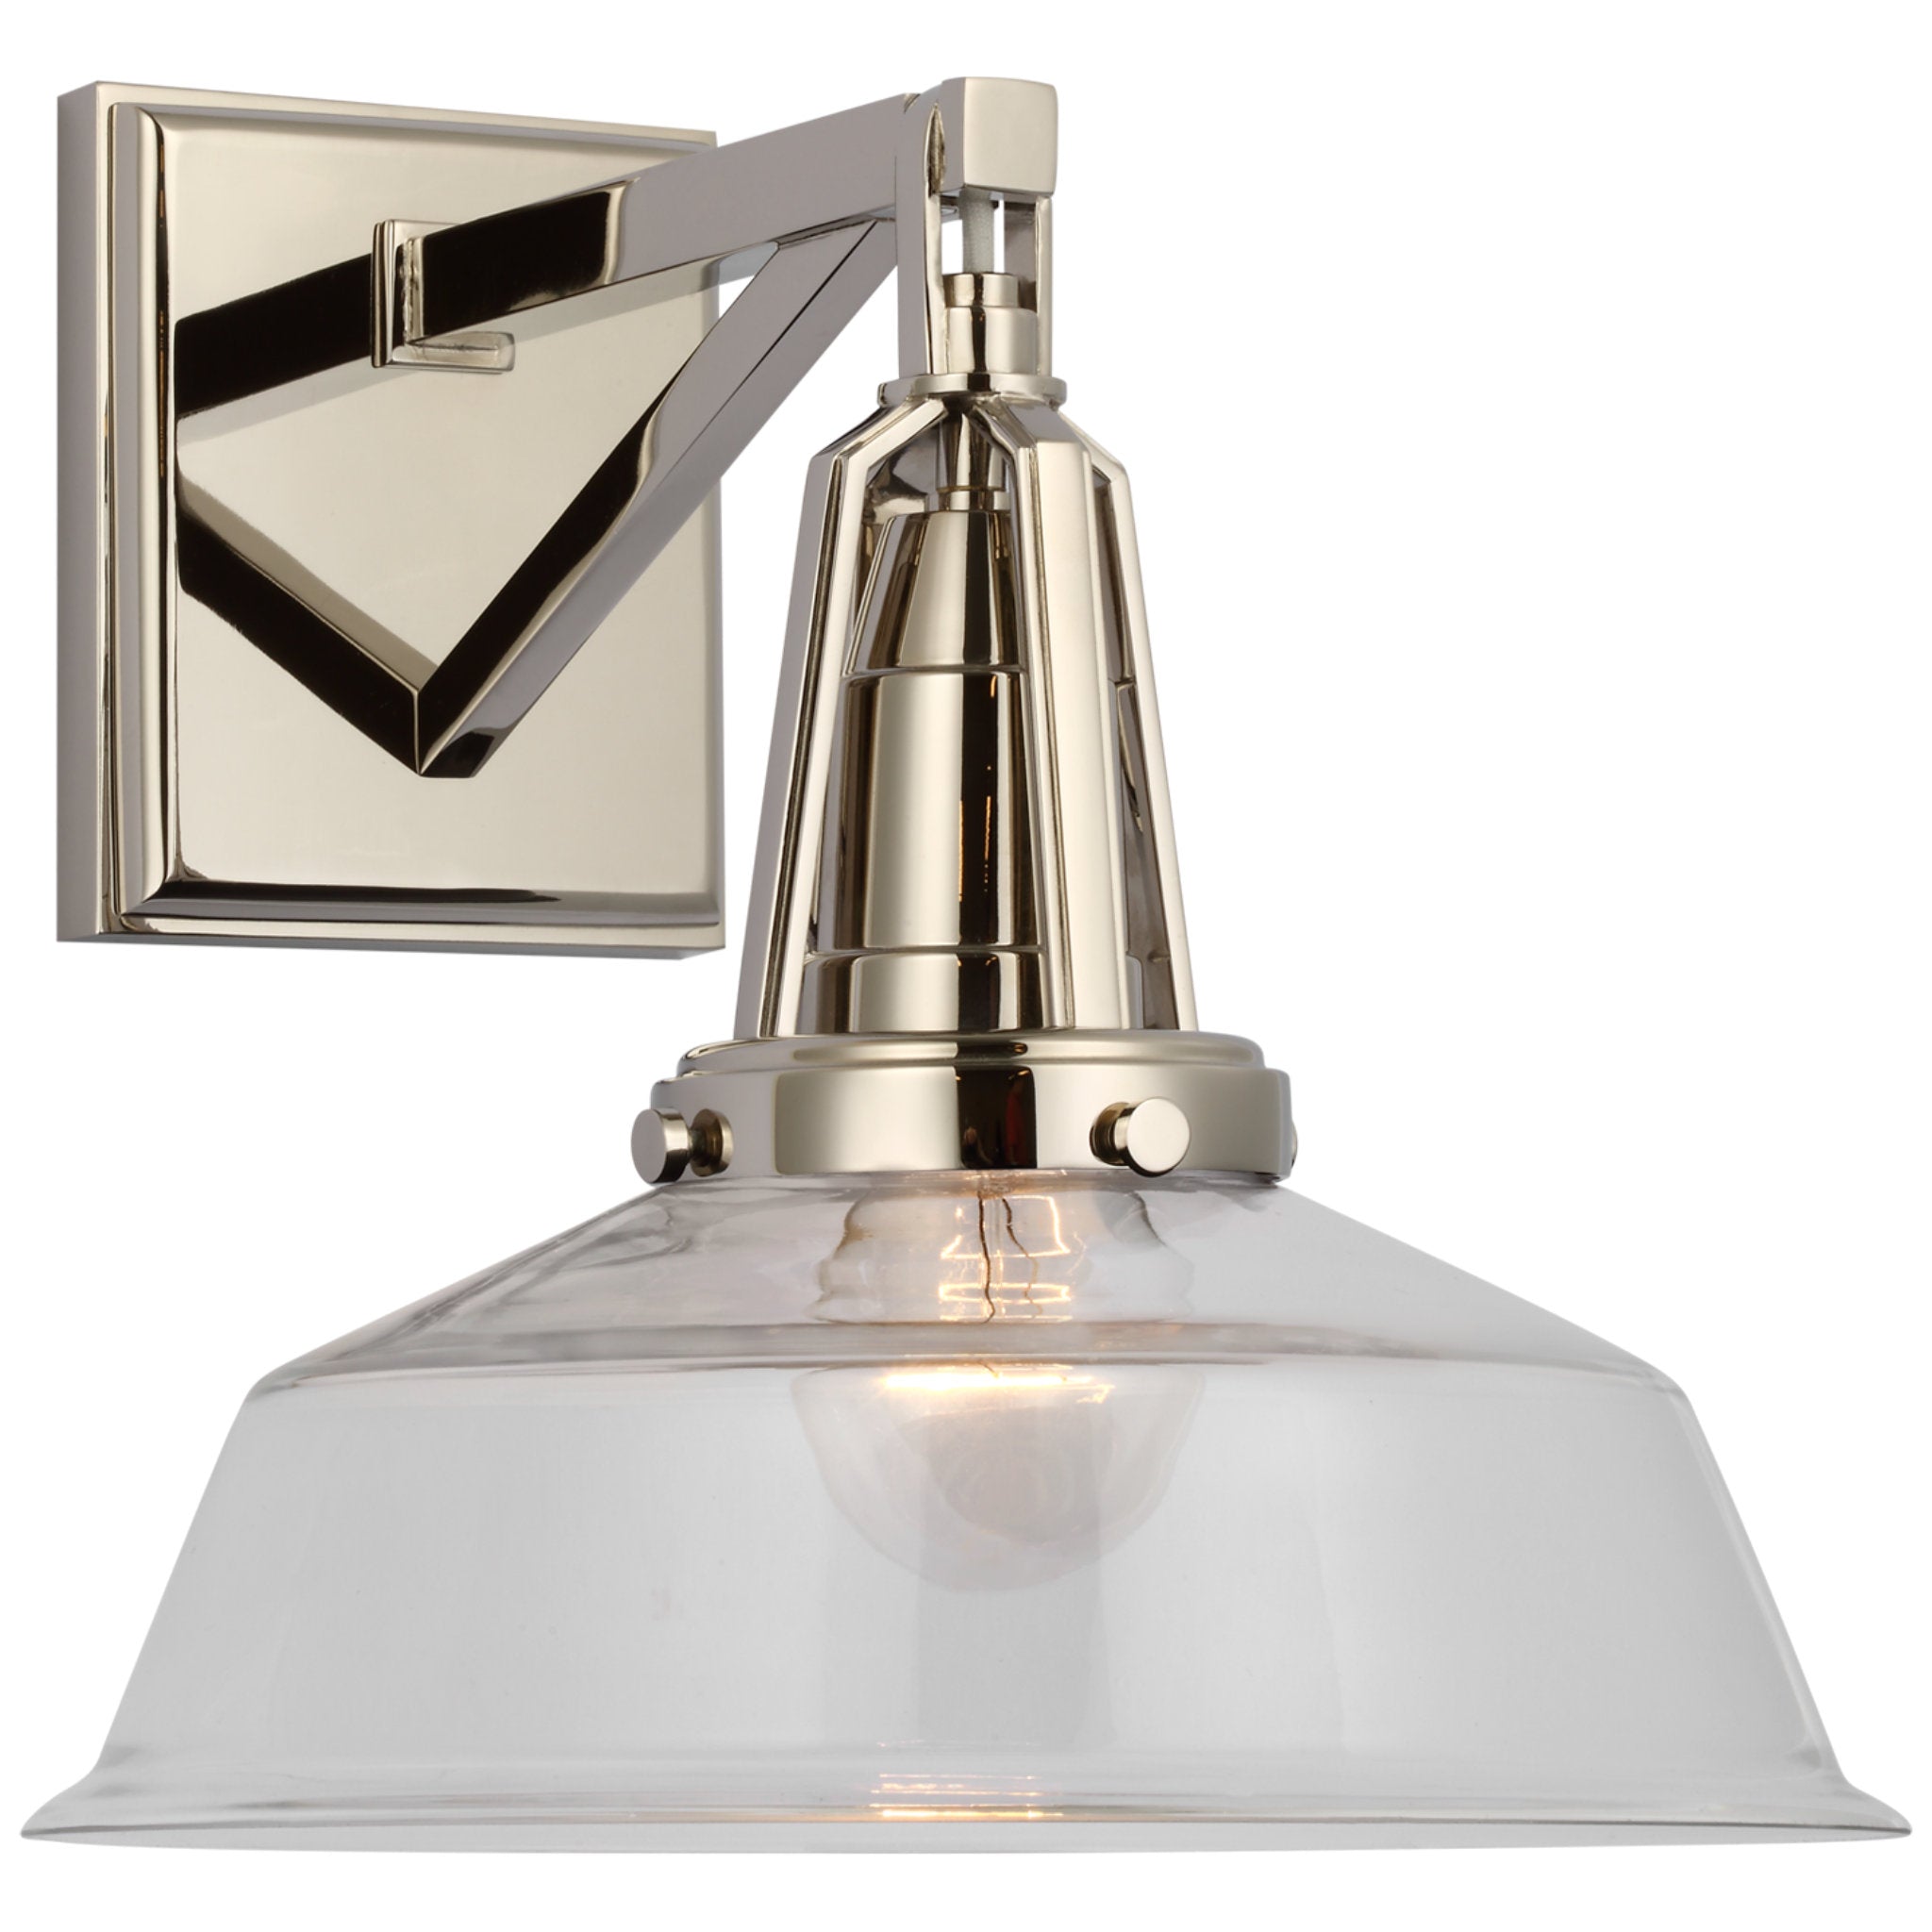 Chapman & Myers Layton 10" Sconce in Polished Nickel with Clear Glass